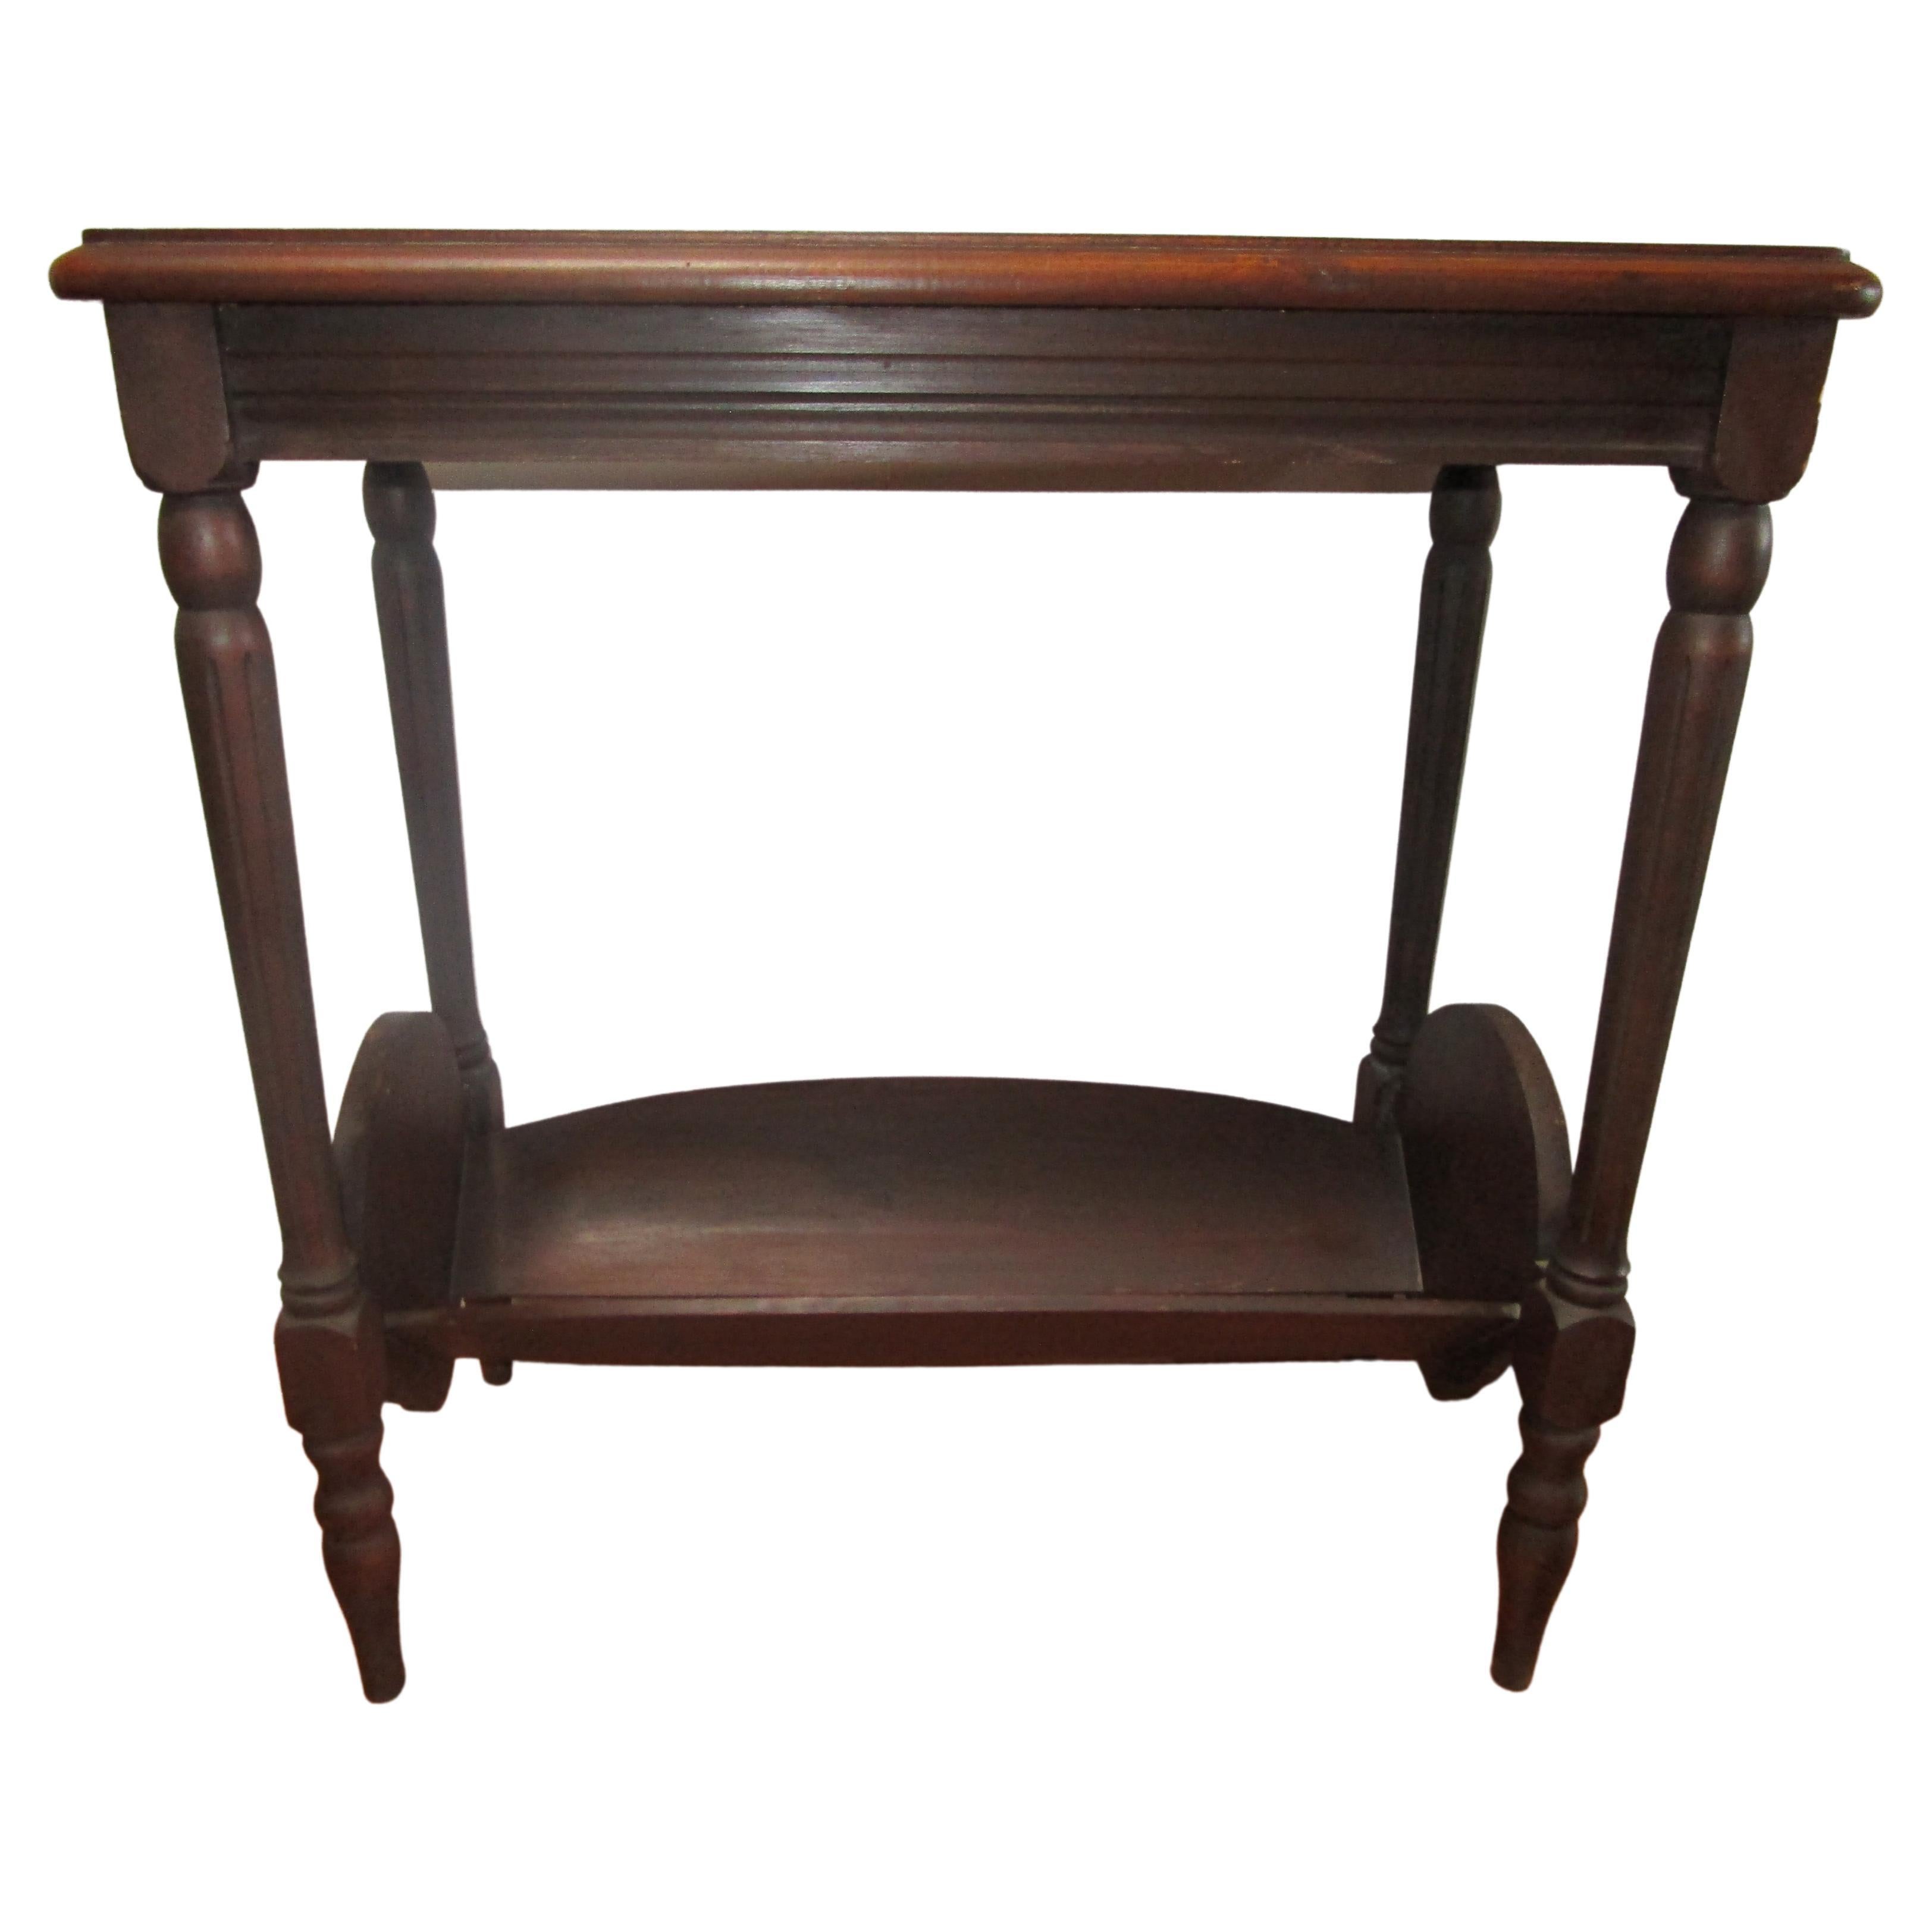 1930s Colonial Revival Style Turned  and Veneered Occasional Bookshelf Table For Sale